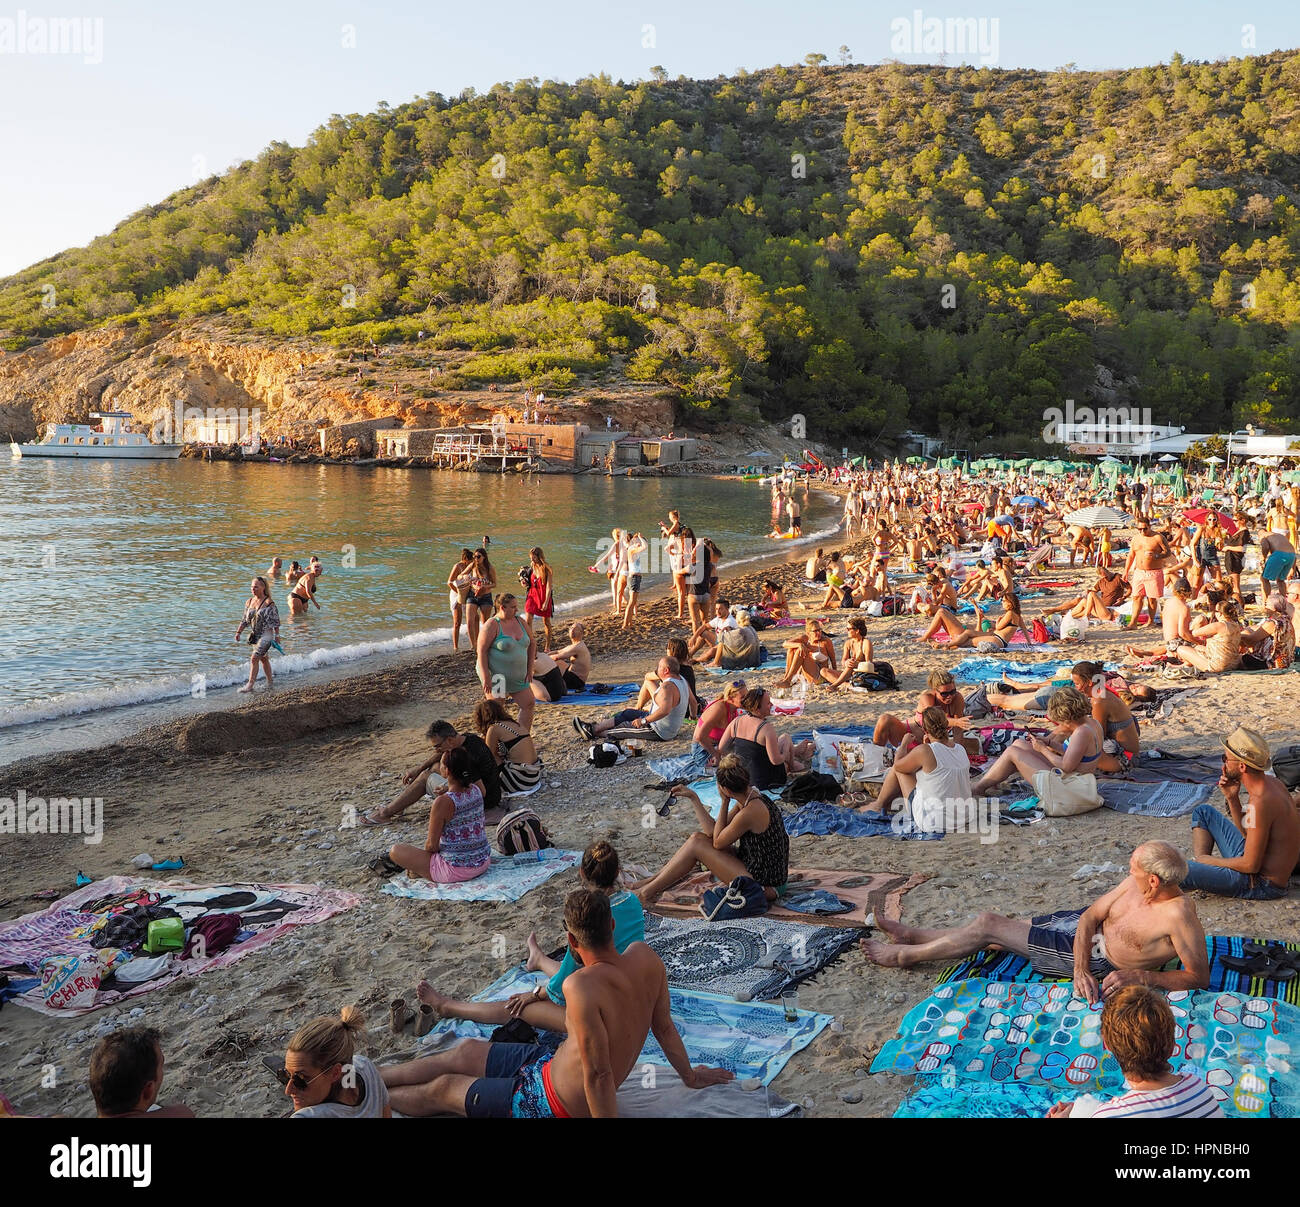 GATHERING OF VISITORS ON THE BEACH AT BENIRRAS BEACH IBIZA AND LISTENING TO DRUMS BEING PLAYED BY HIPPYS Stock Photo